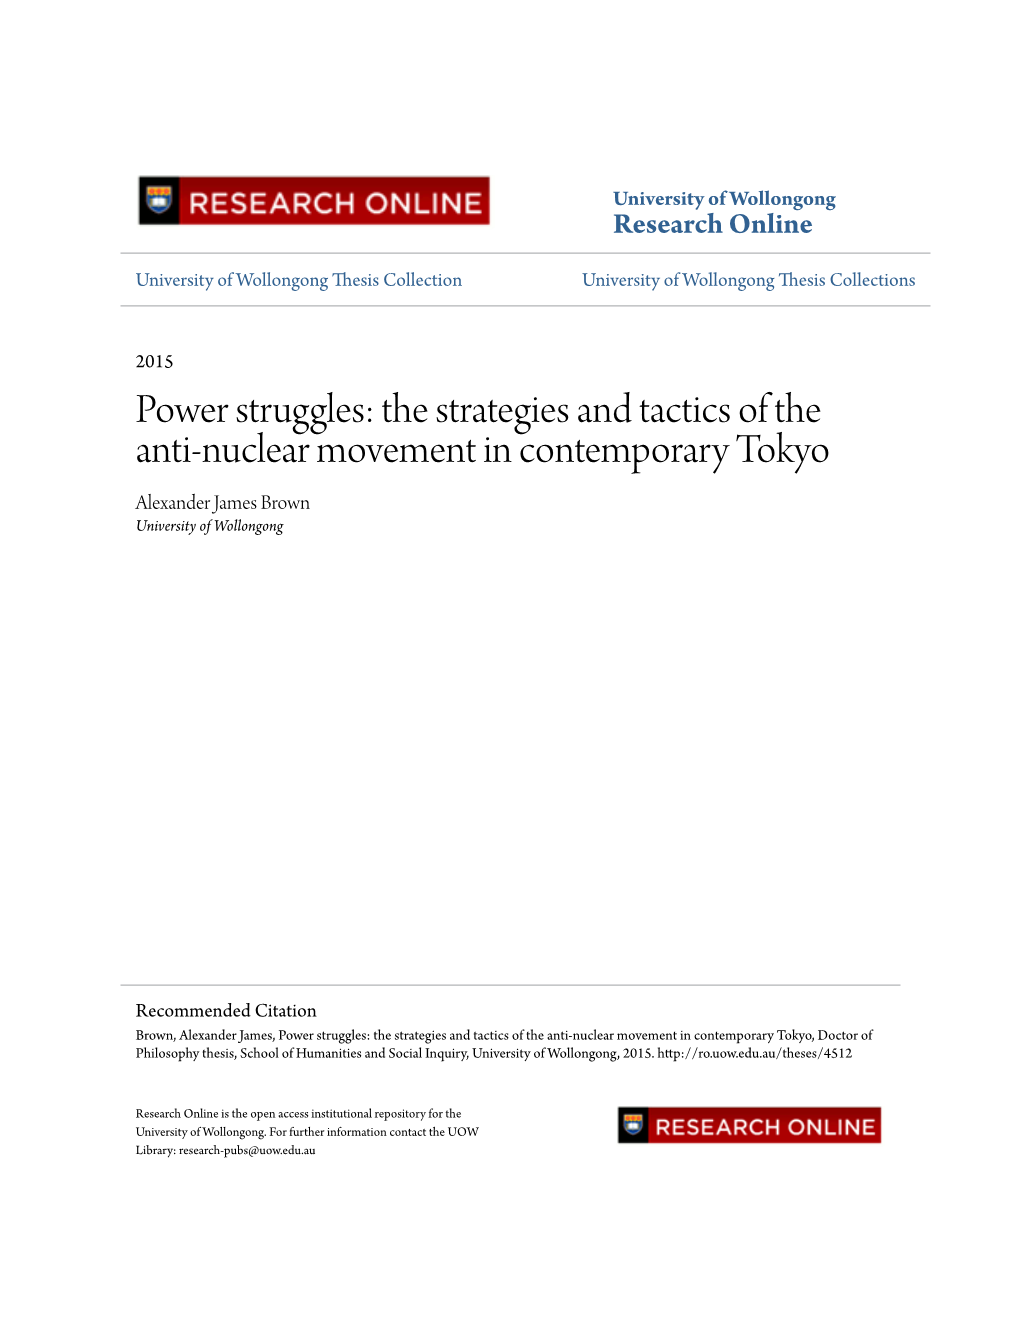 Power Struggles: the Strategies and Tactics of the Anti-Nuclear Movement in Contemporary Tokyo Alexander James Brown University of Wollongong